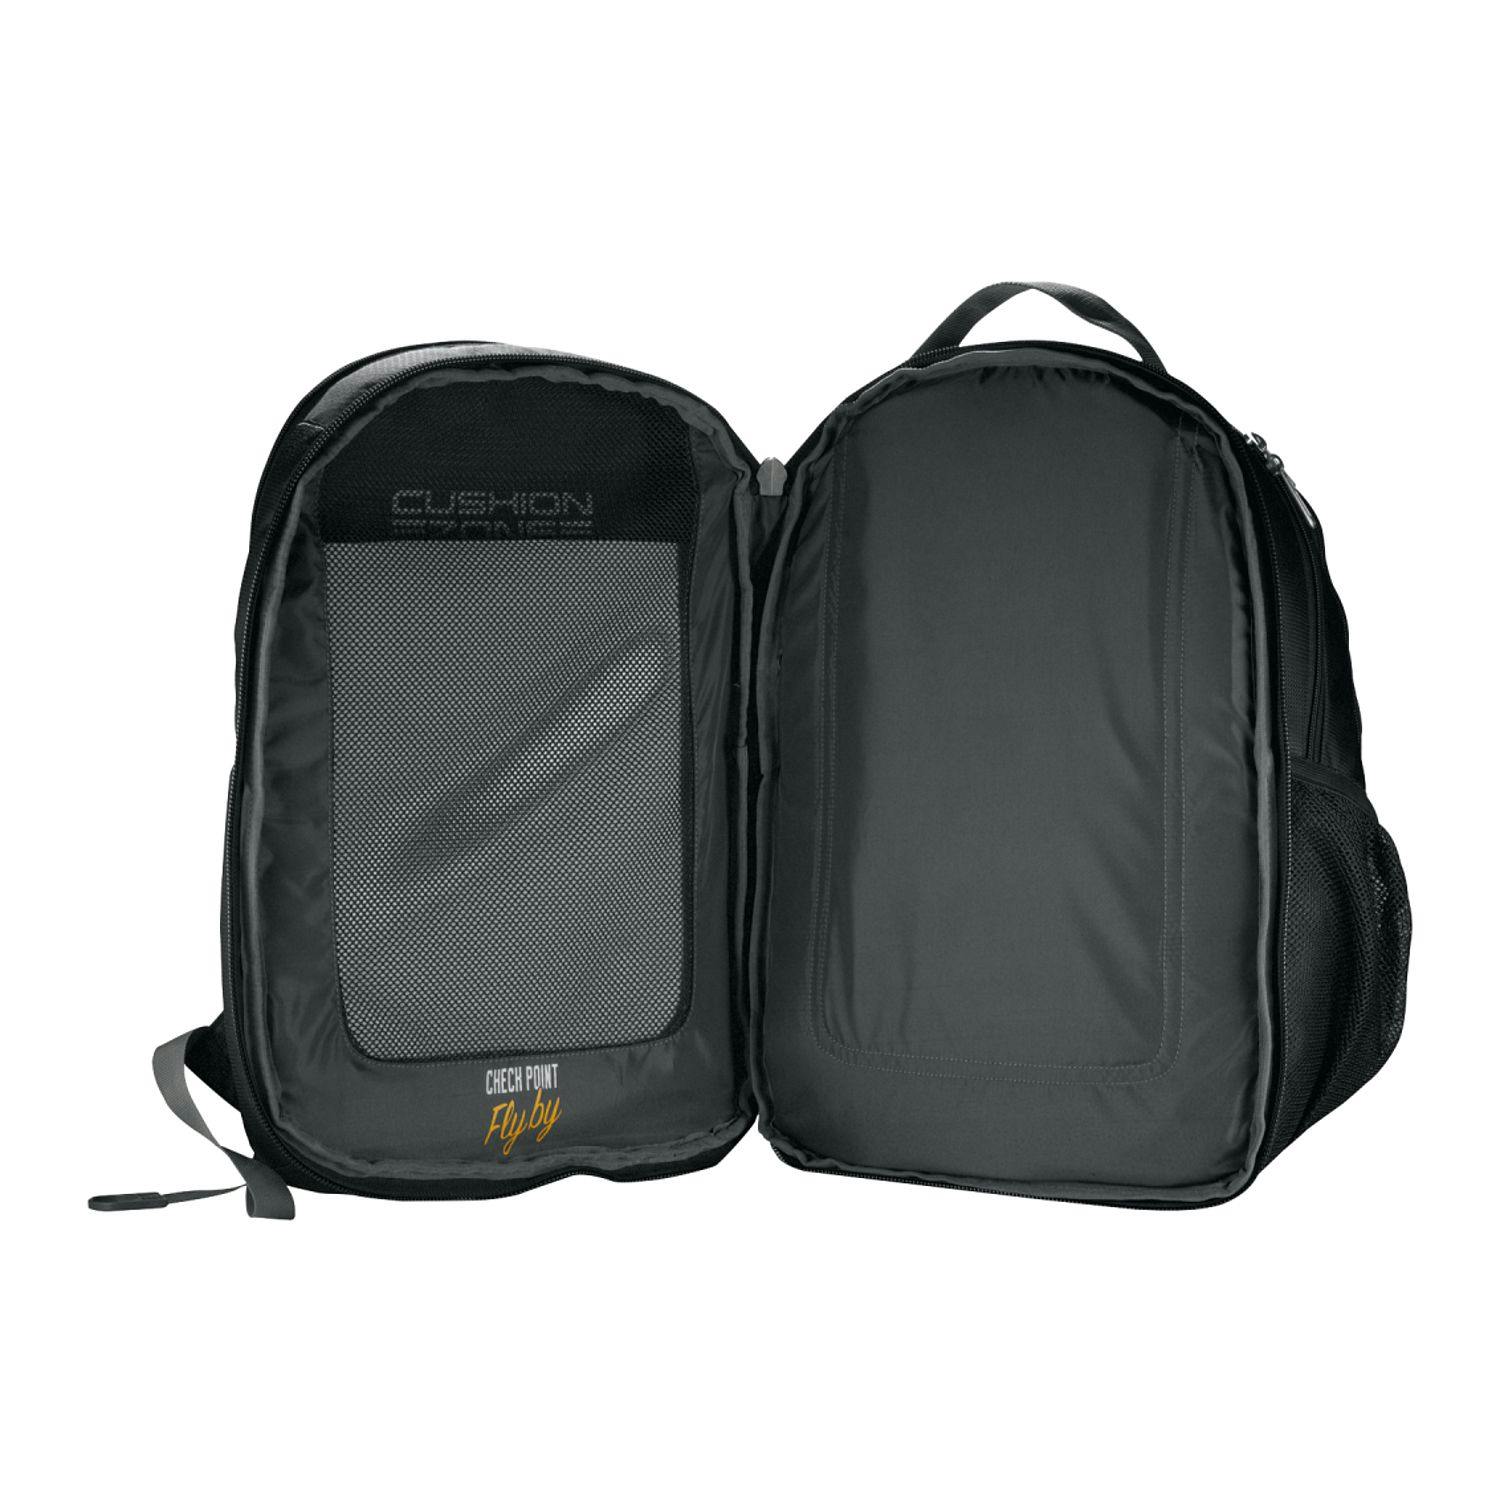 High Sierra Fly-By 17" Computer Backpack - additional Image 2